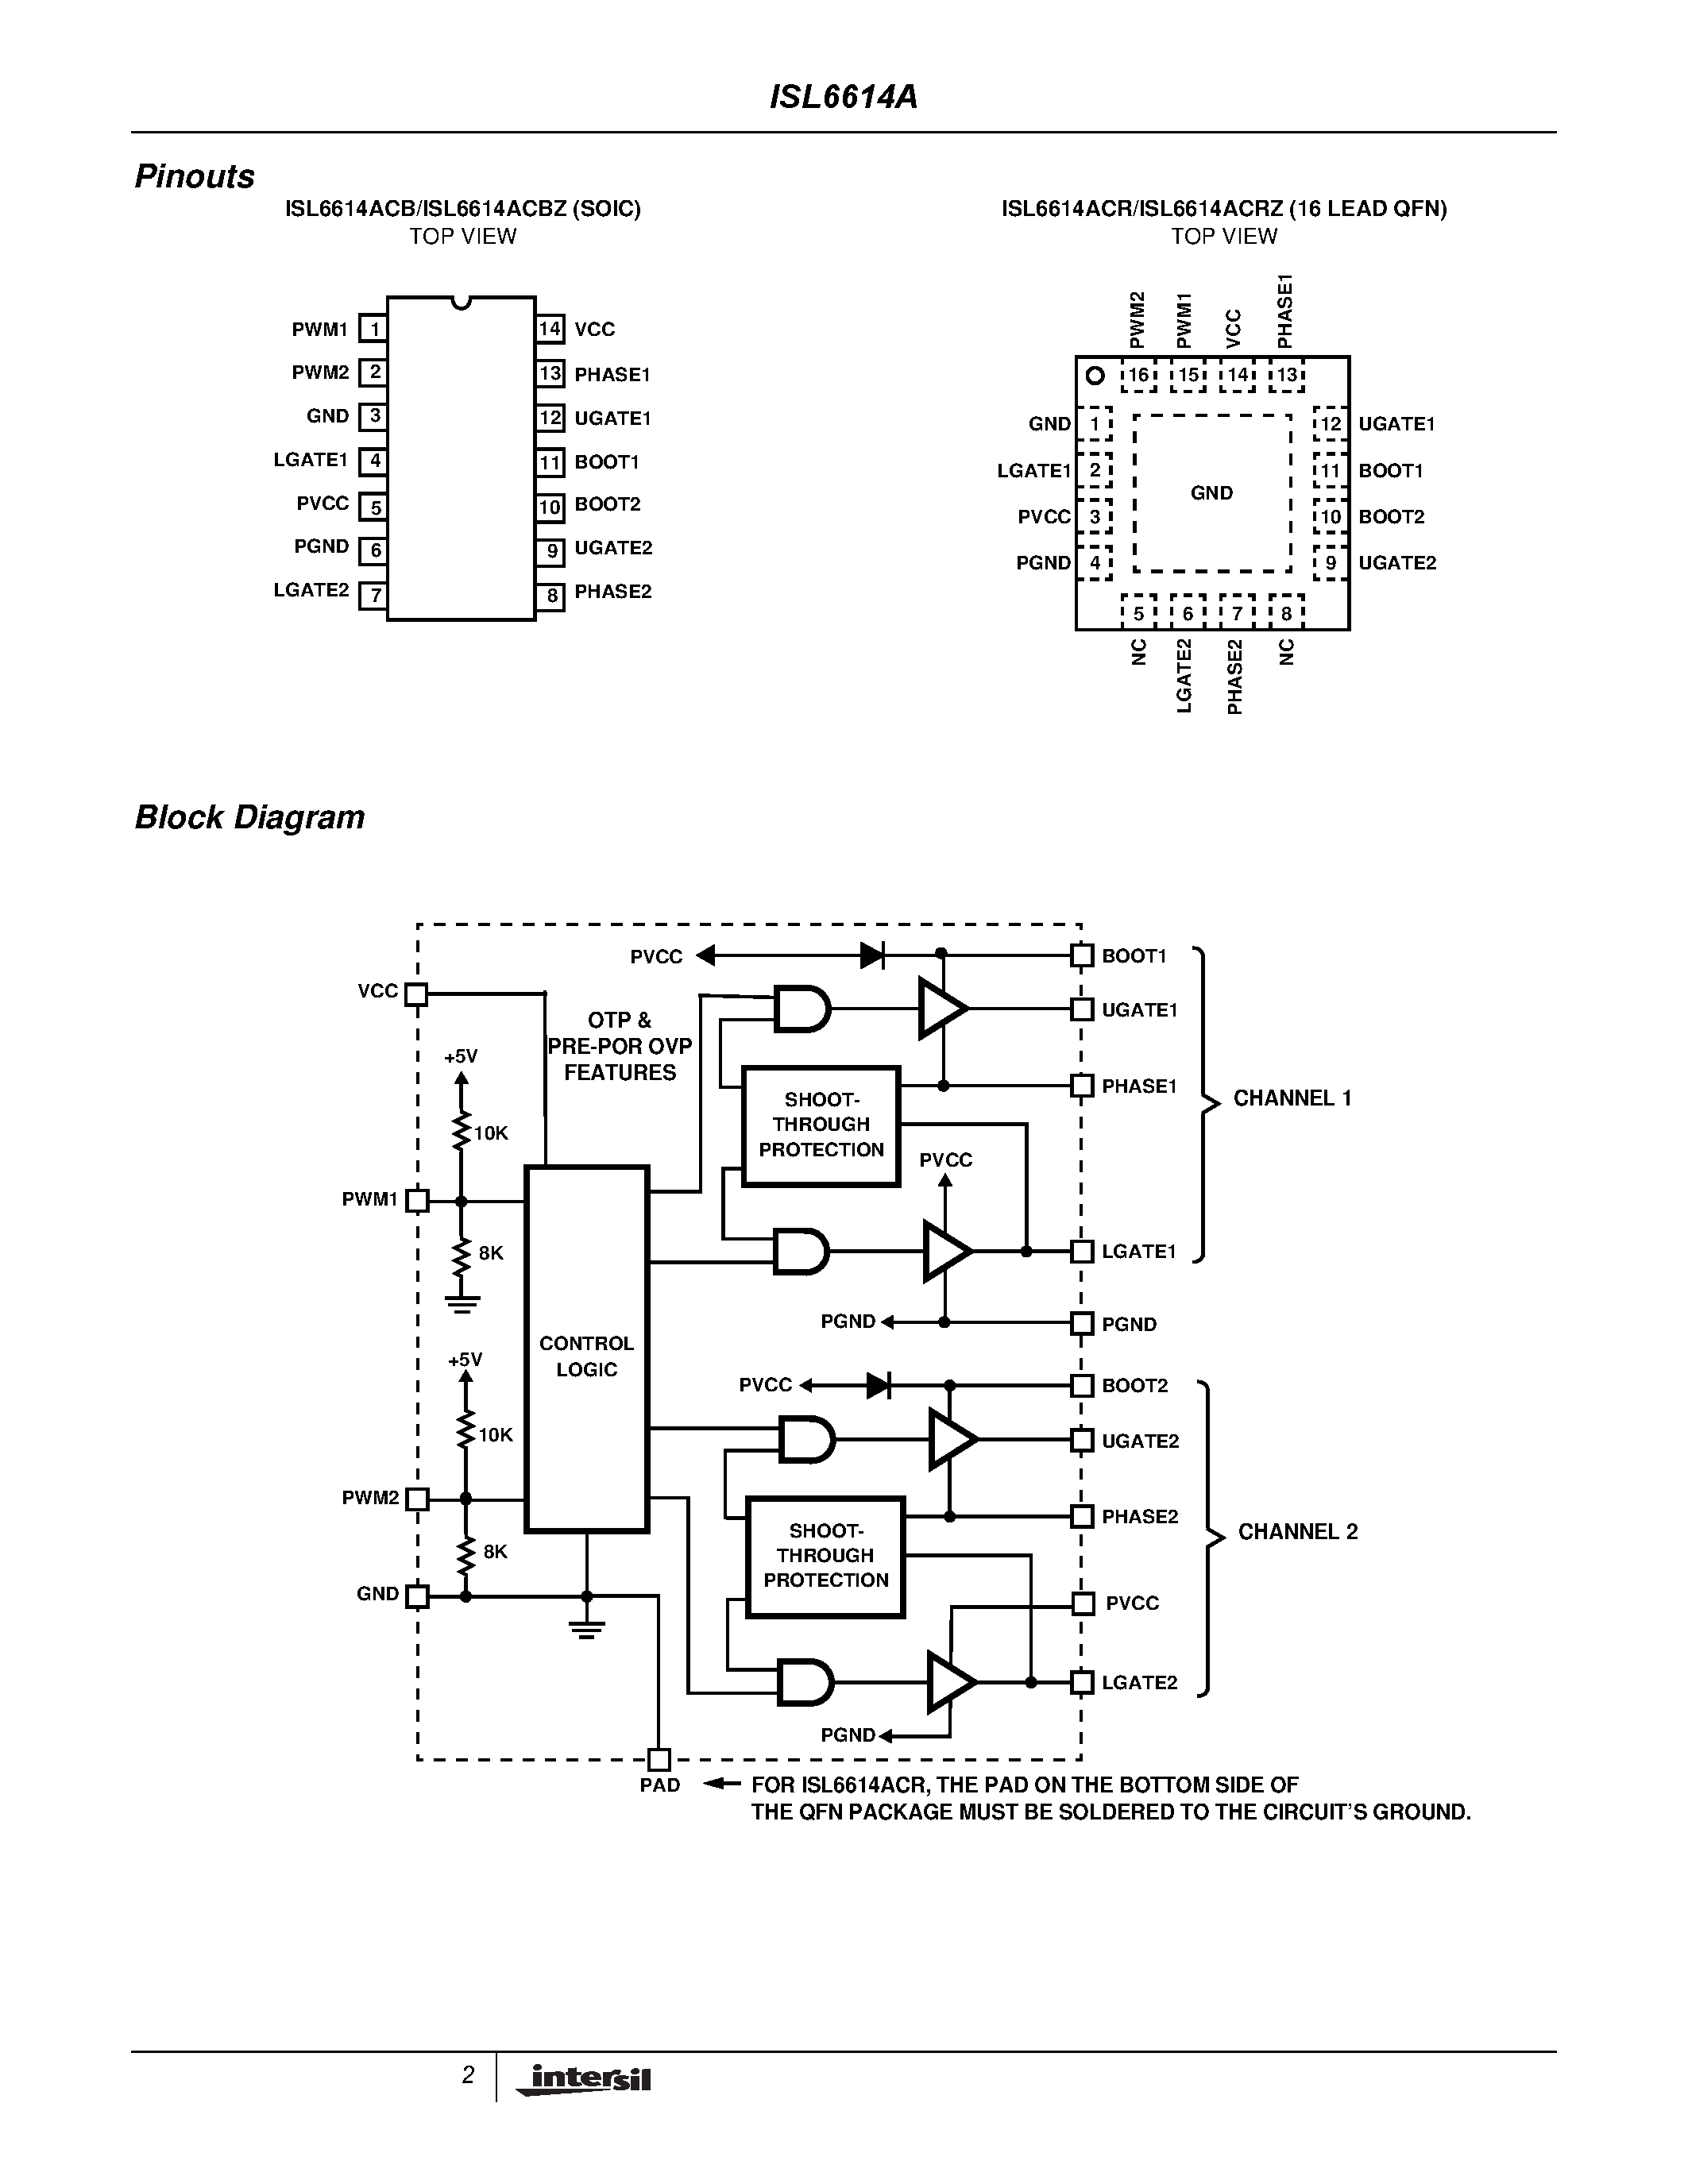 Datasheet ISL6614ACB - Dual Advanced Synchronous Rectified Buck MOSFET Drivers with Pre-POR OVP page 2